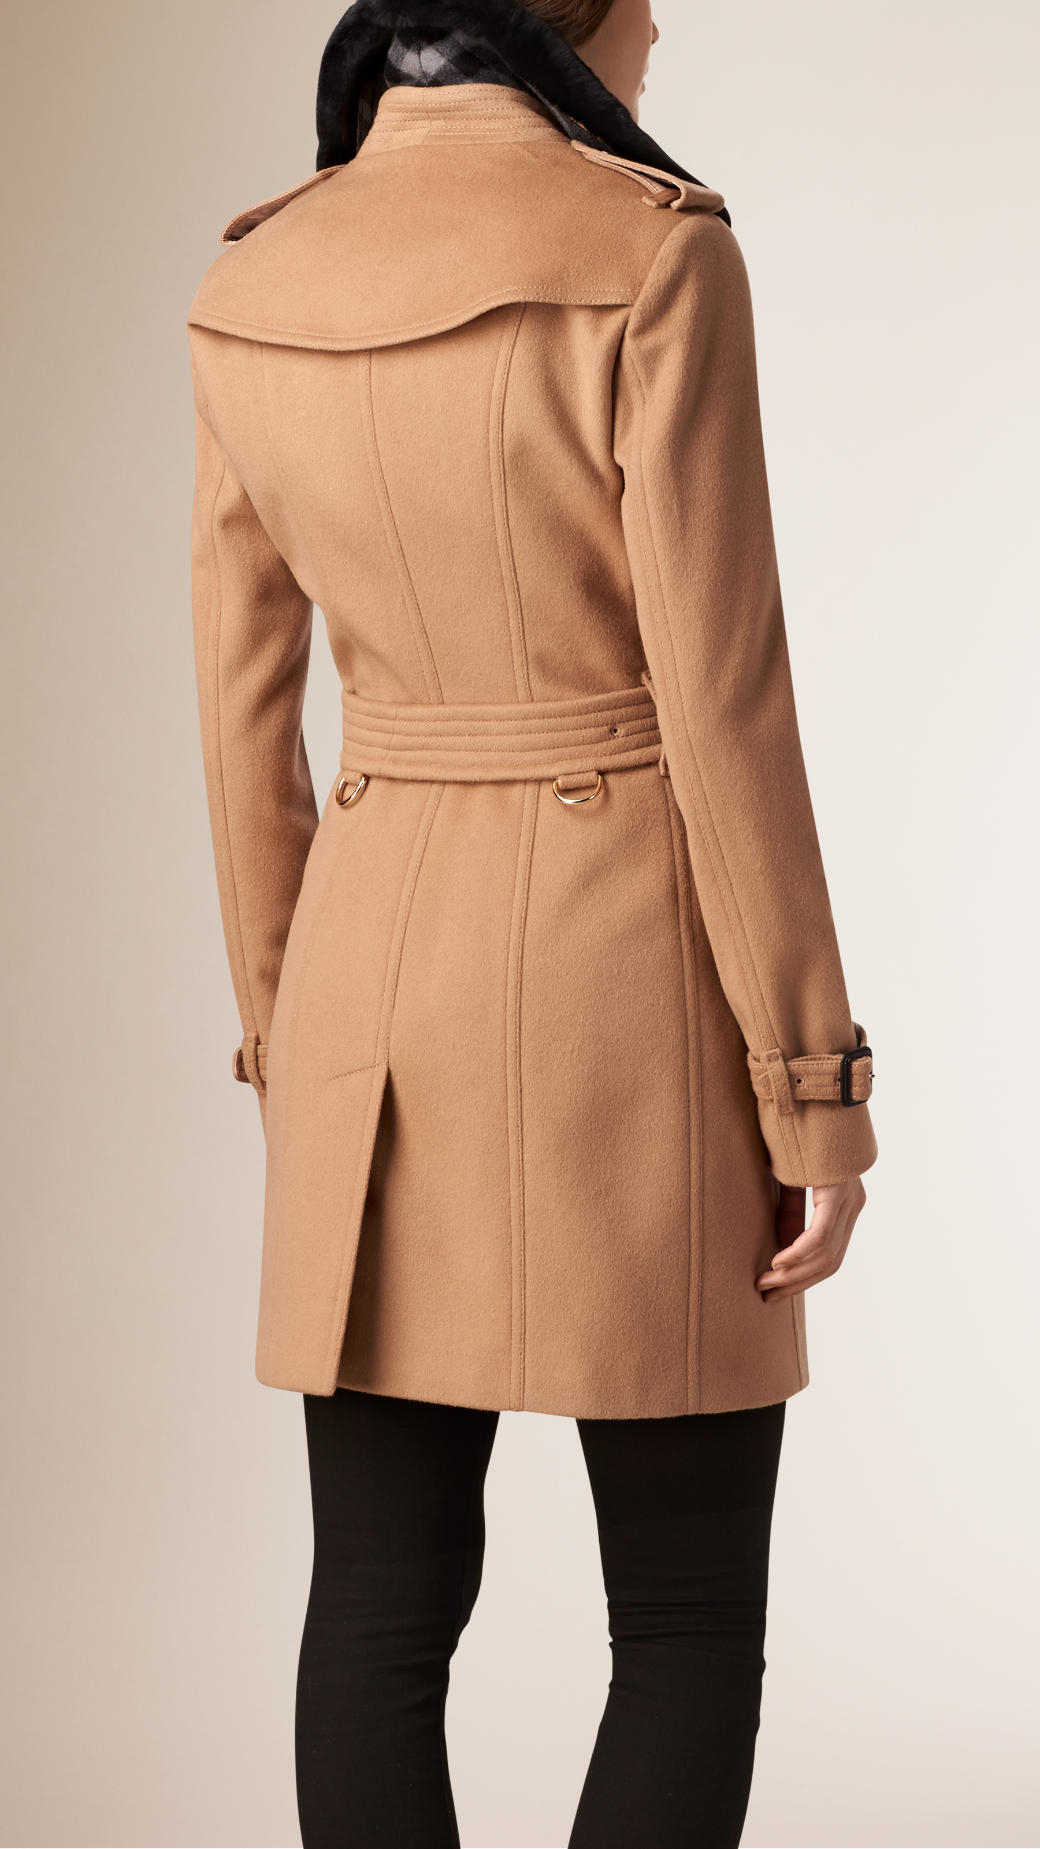 Burberry Fur Collar Wool Cashmere Trench Coat in Camel (Natural) - Lyst